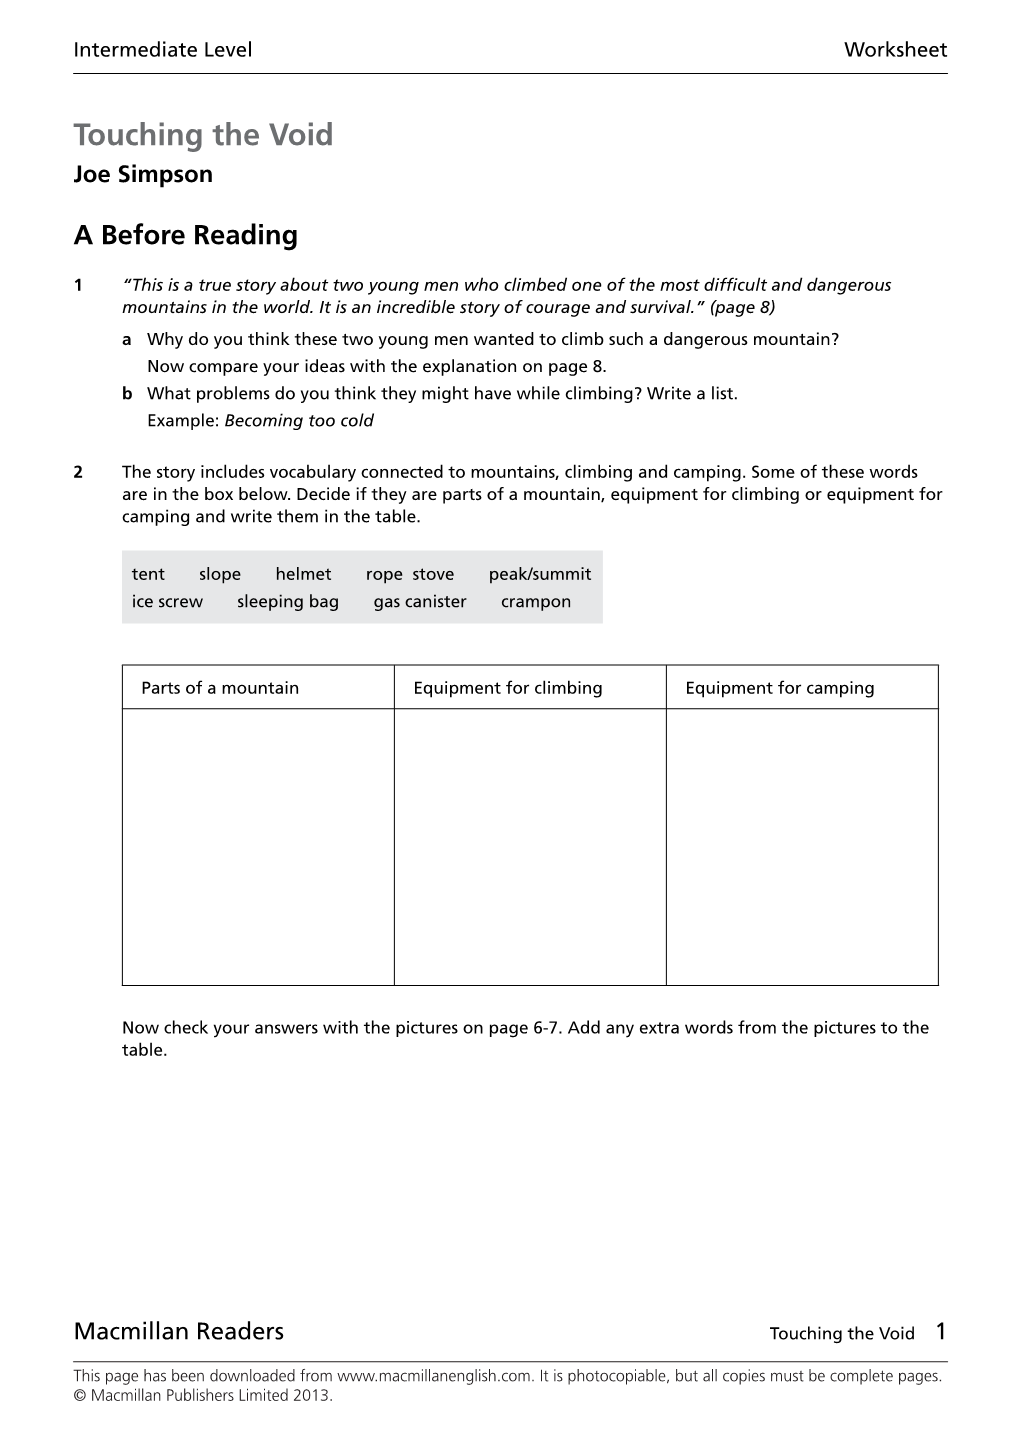 Touching the Void Worksheet